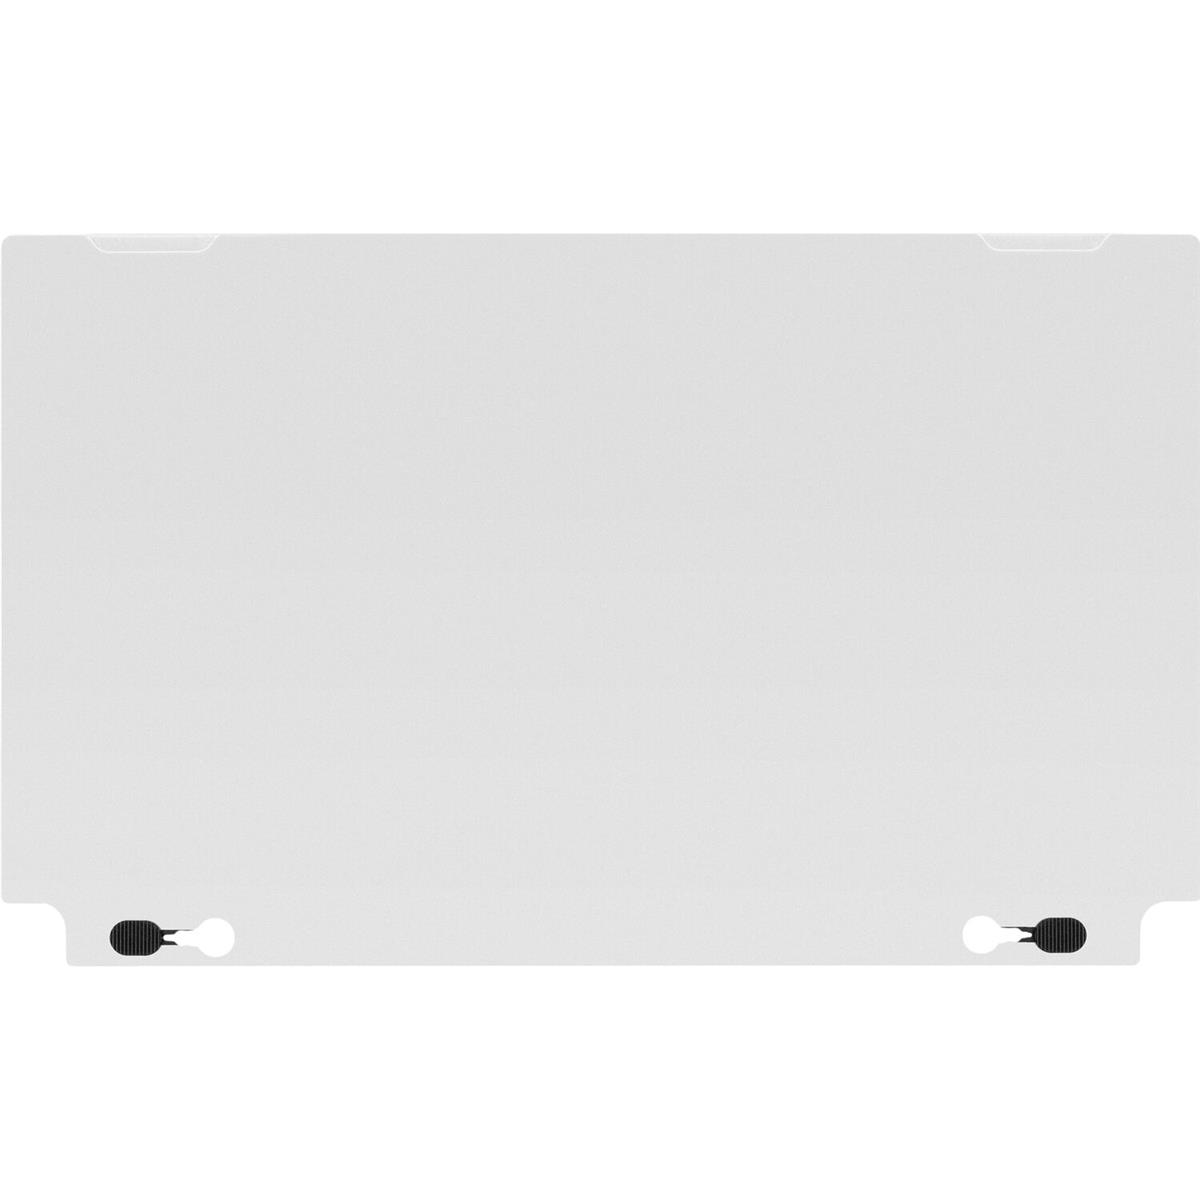 Image of SmallHD Deluxe Acrylic Locking Screen Protector for Cine 13&quot; Monitor